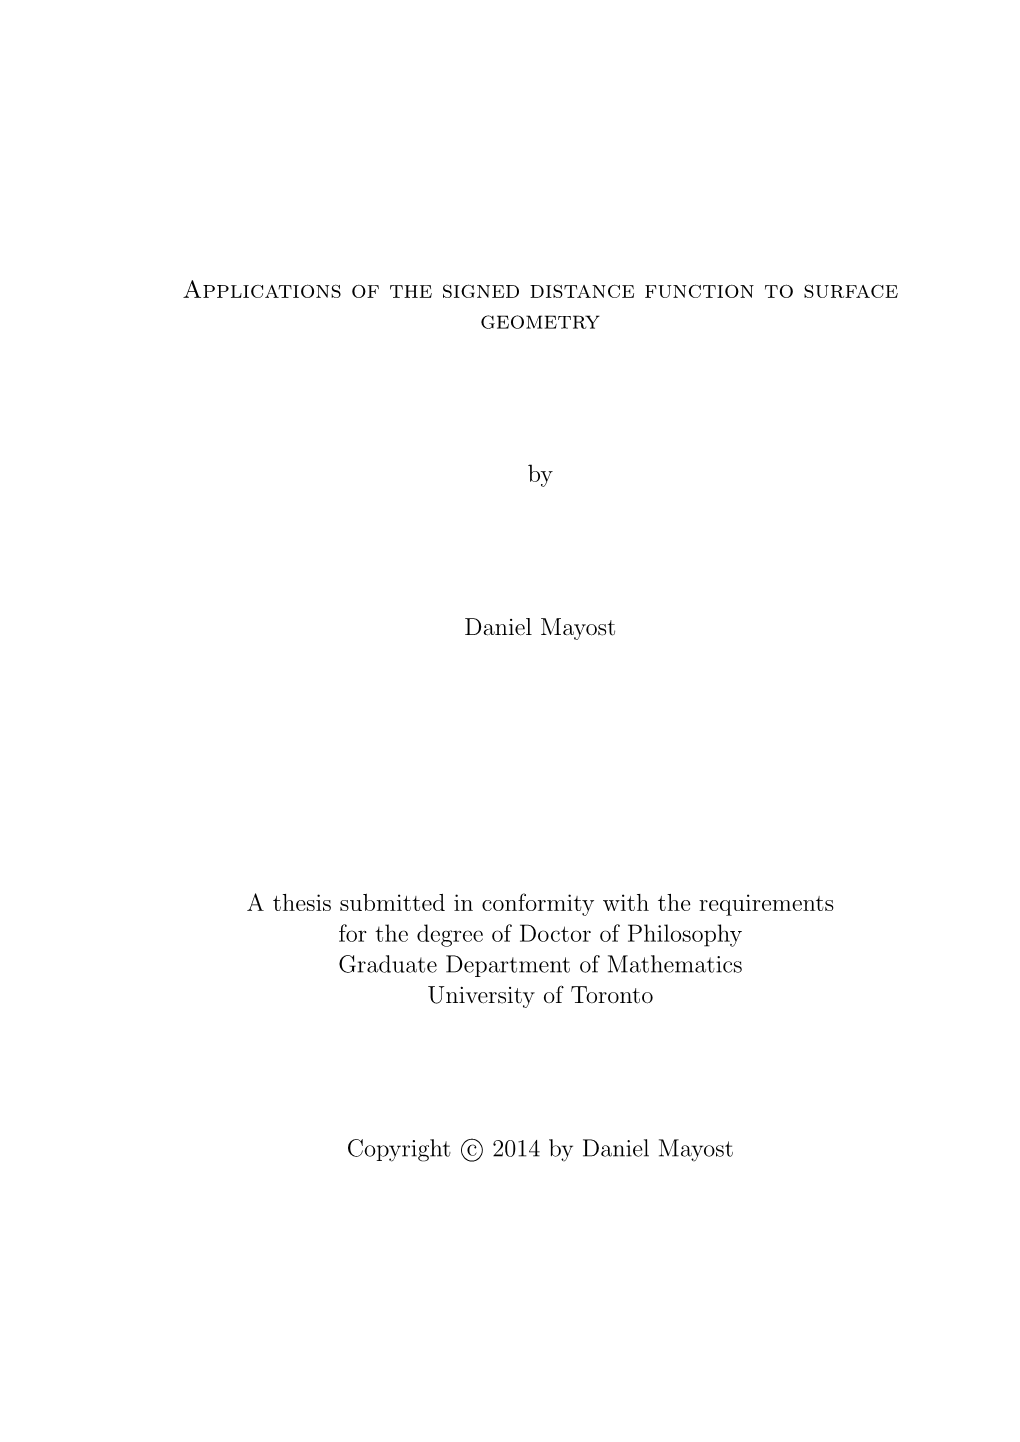 Applications of the Signed Distance Function to Surface Geometry